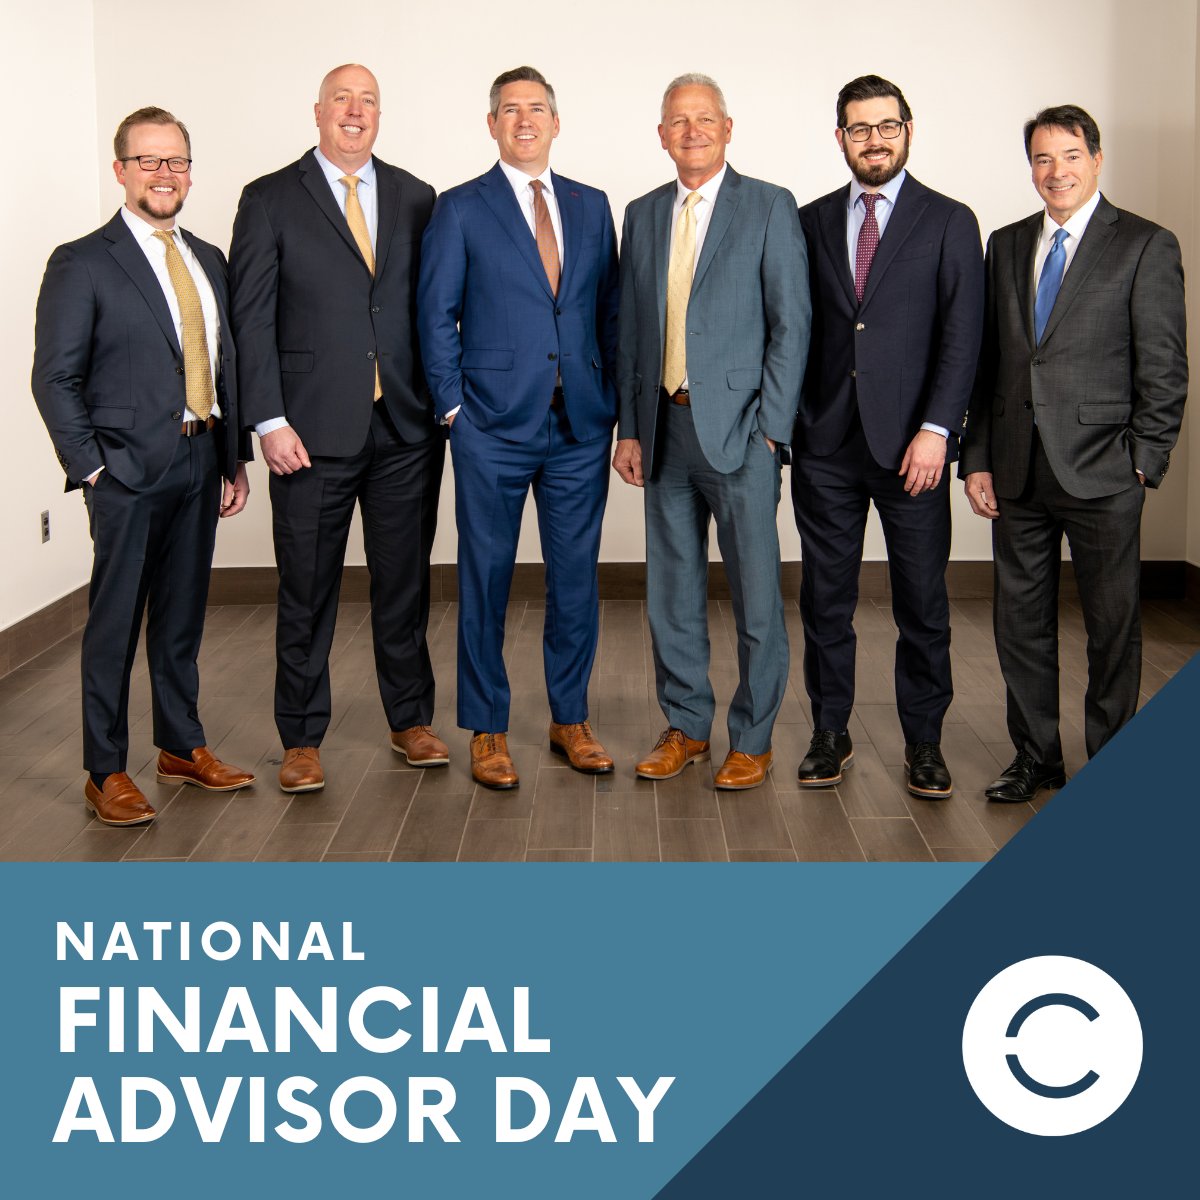 Financial wellness and #insuranceplanning involves managing and preserving wealth for the future with the help of a professional to achieve goals and balance priorities.  We are honored to be of service to you, and we thank you for your partnership!

#financialadvisor #Marlton